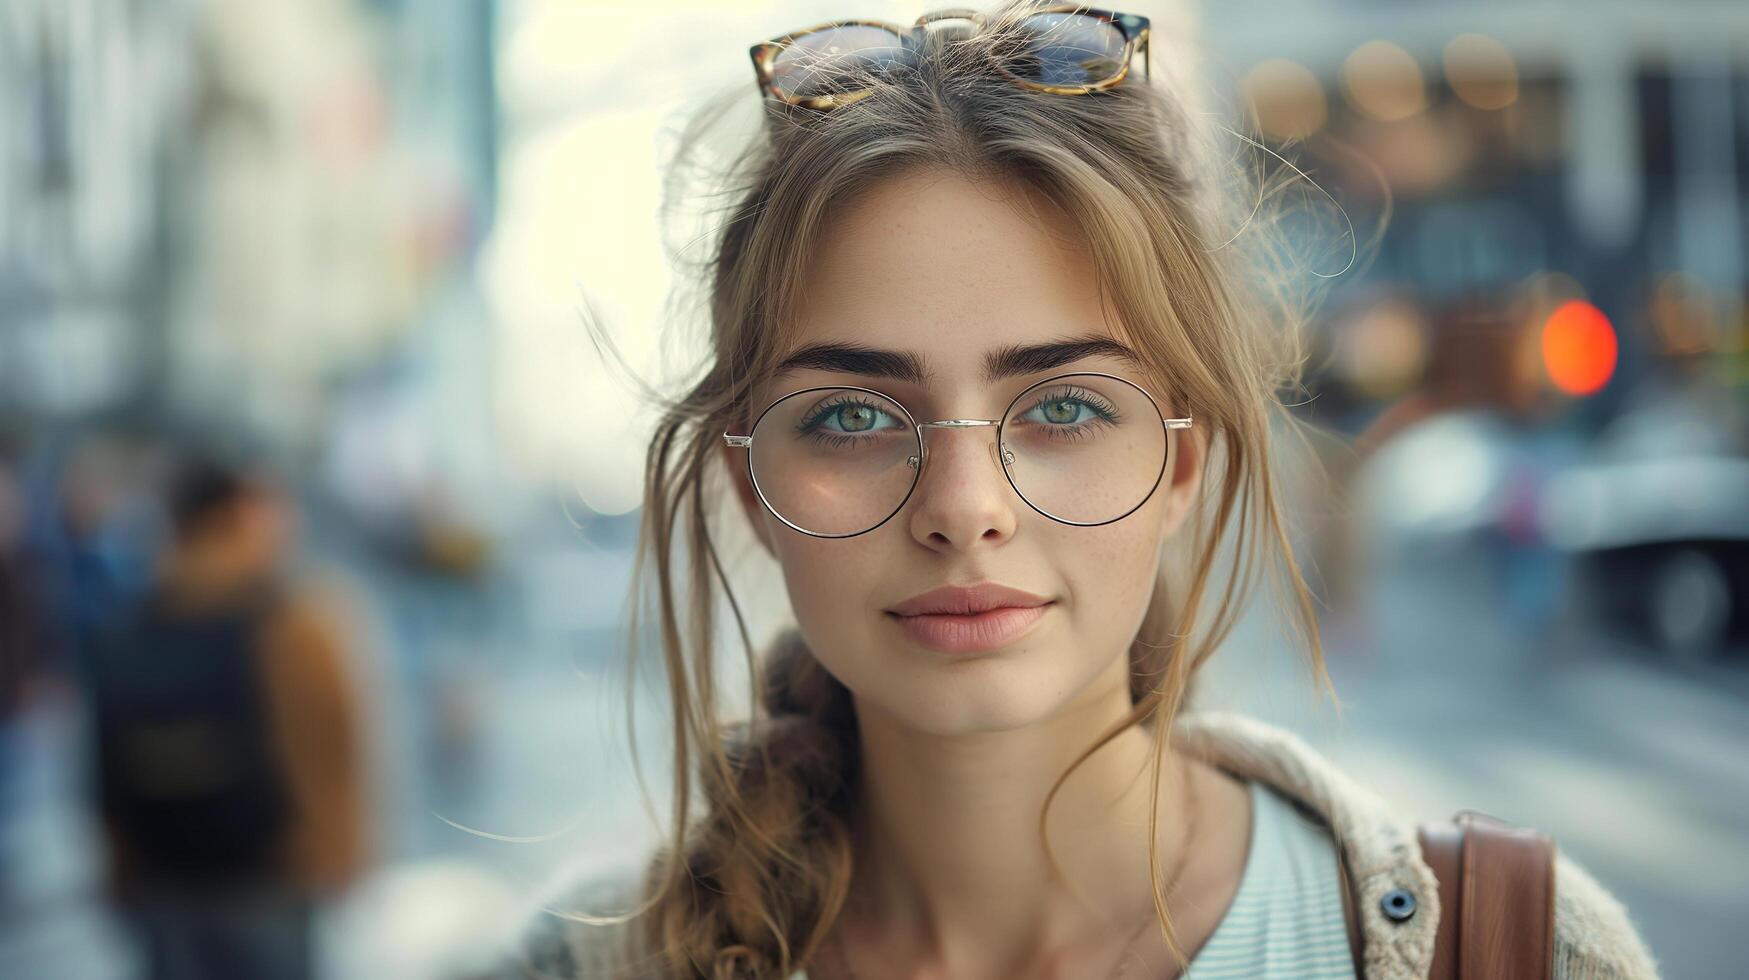 AI generated a young woman in glasses on busy city street photo